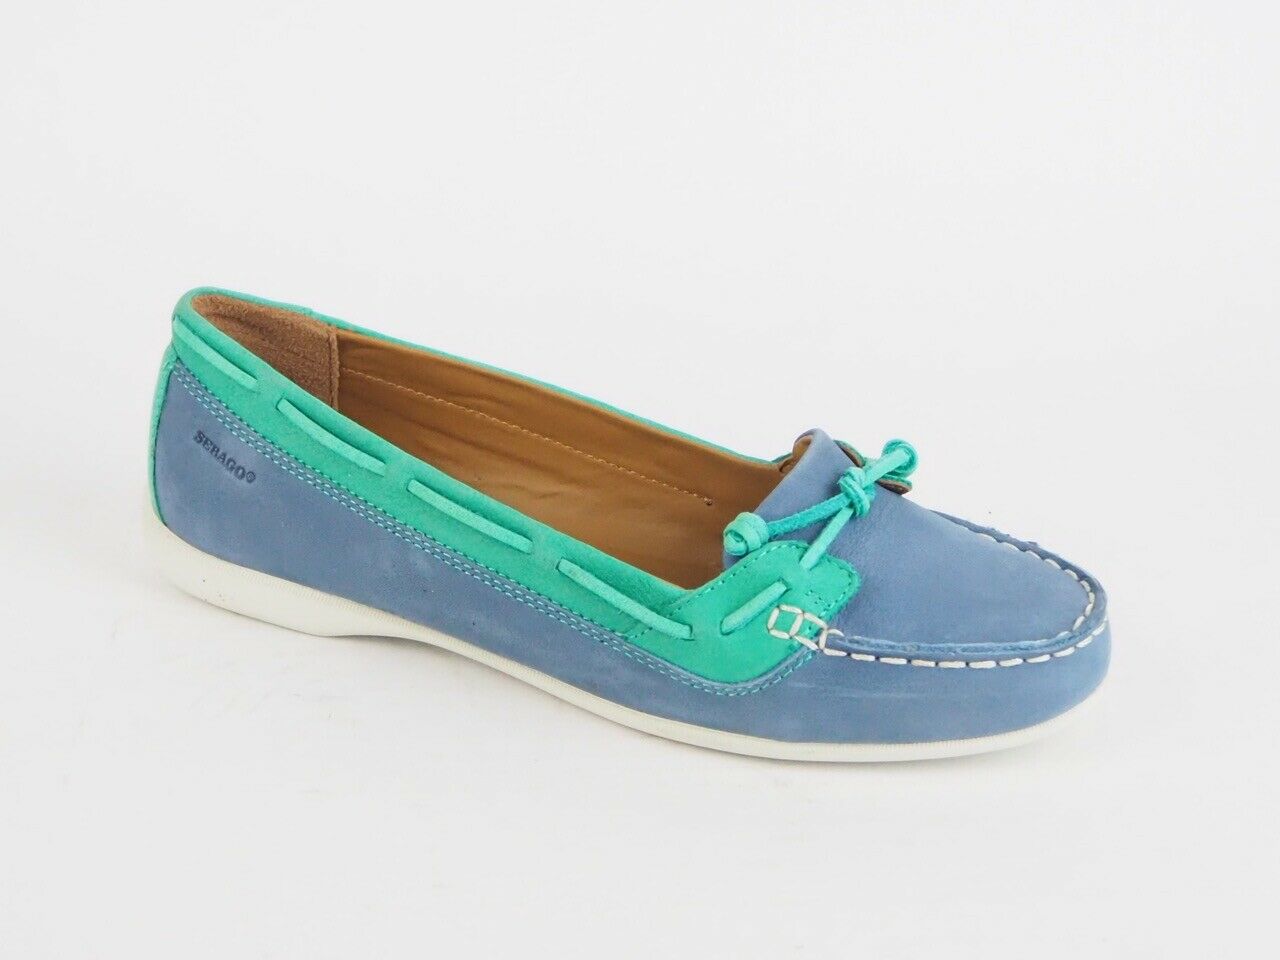 Womens Sebago Felucca Lace B668001 W Leather Lace Up Teal Boat Casual Shoes - London Top Style